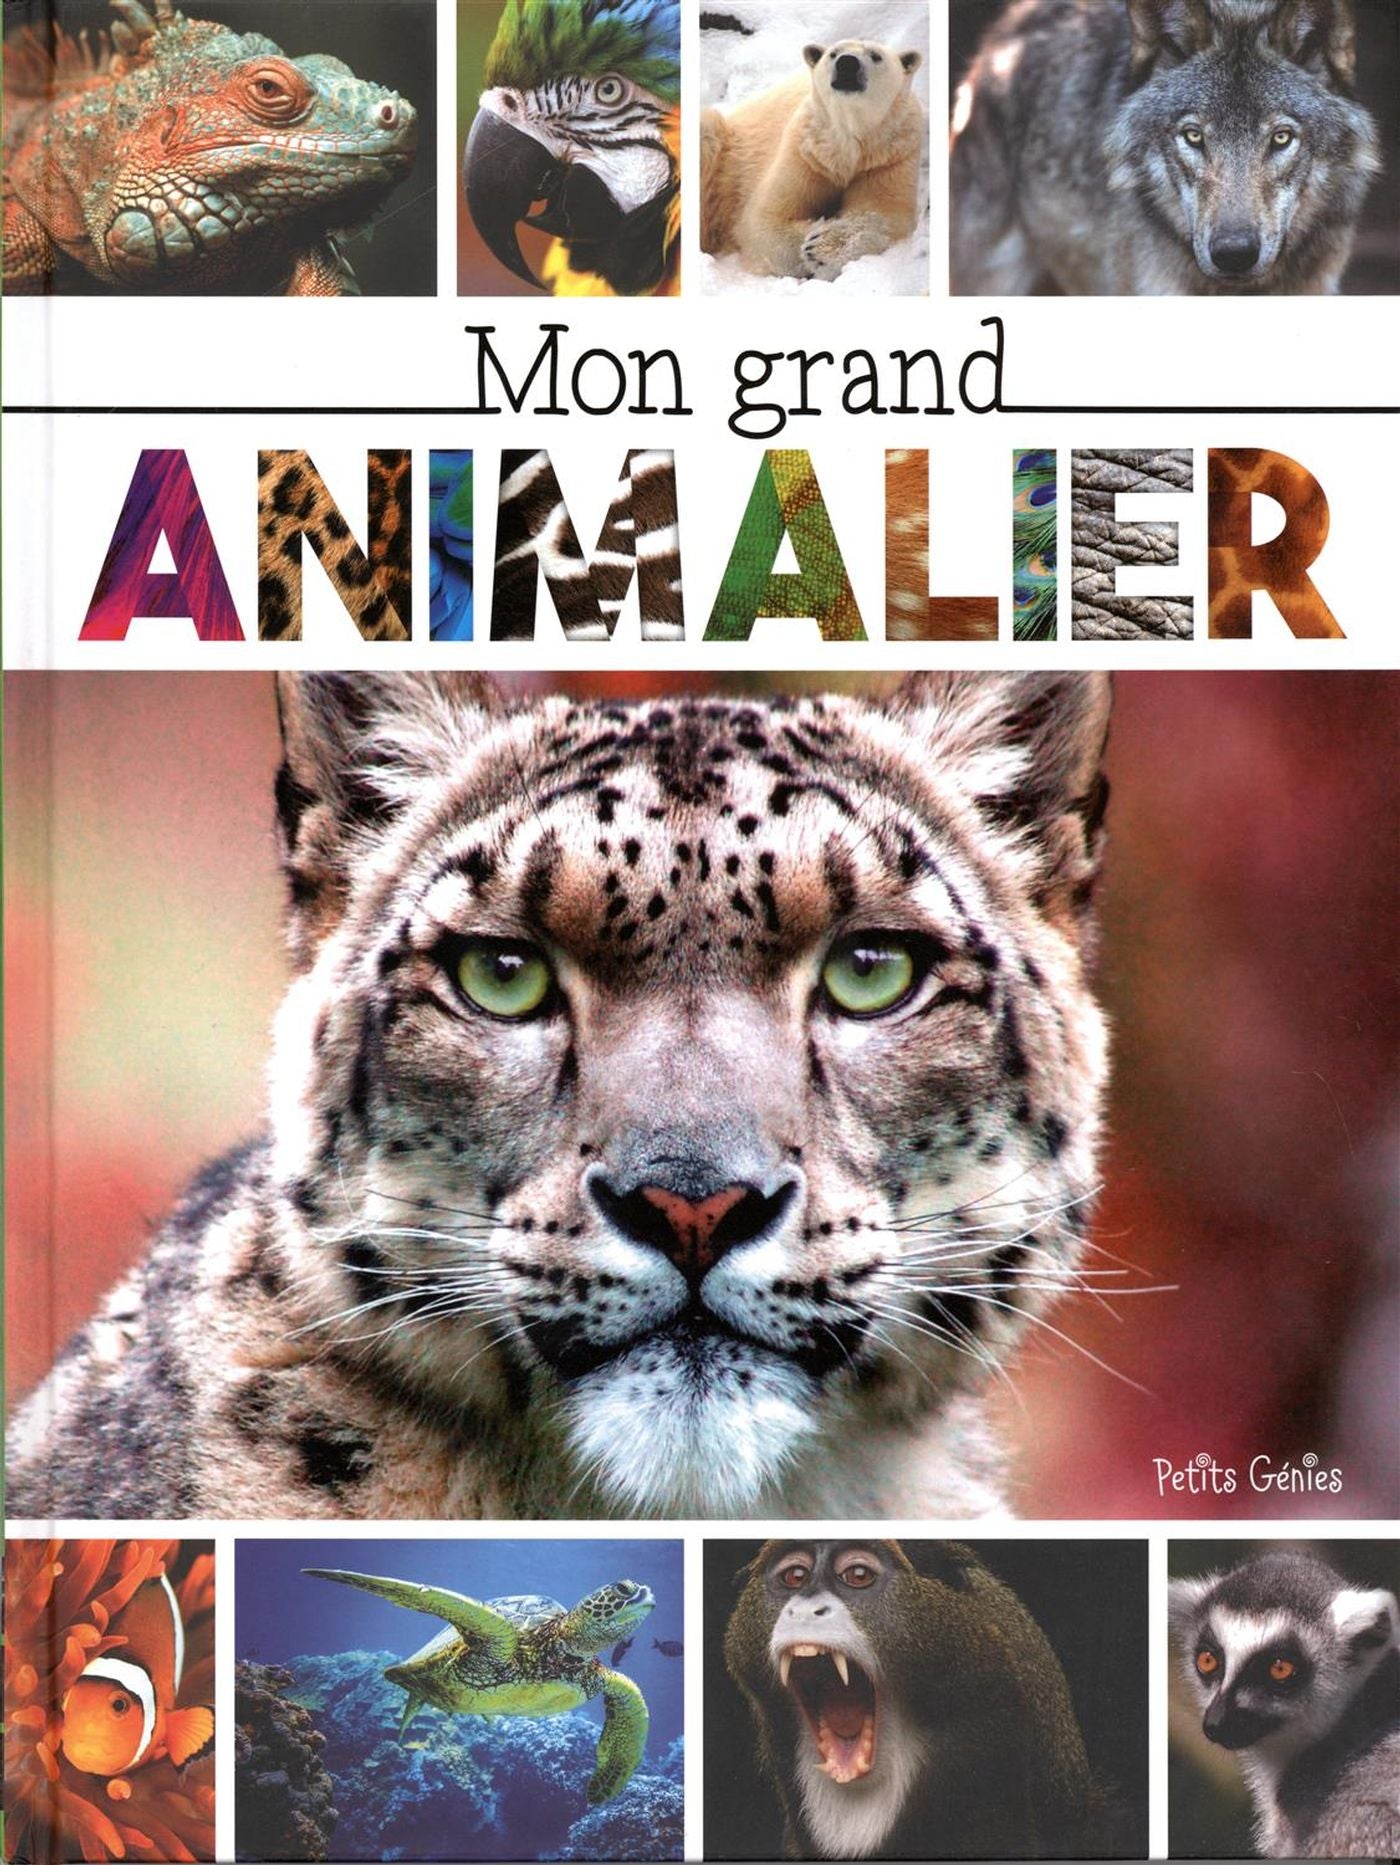 Mon grand animalier - Claire Chabot